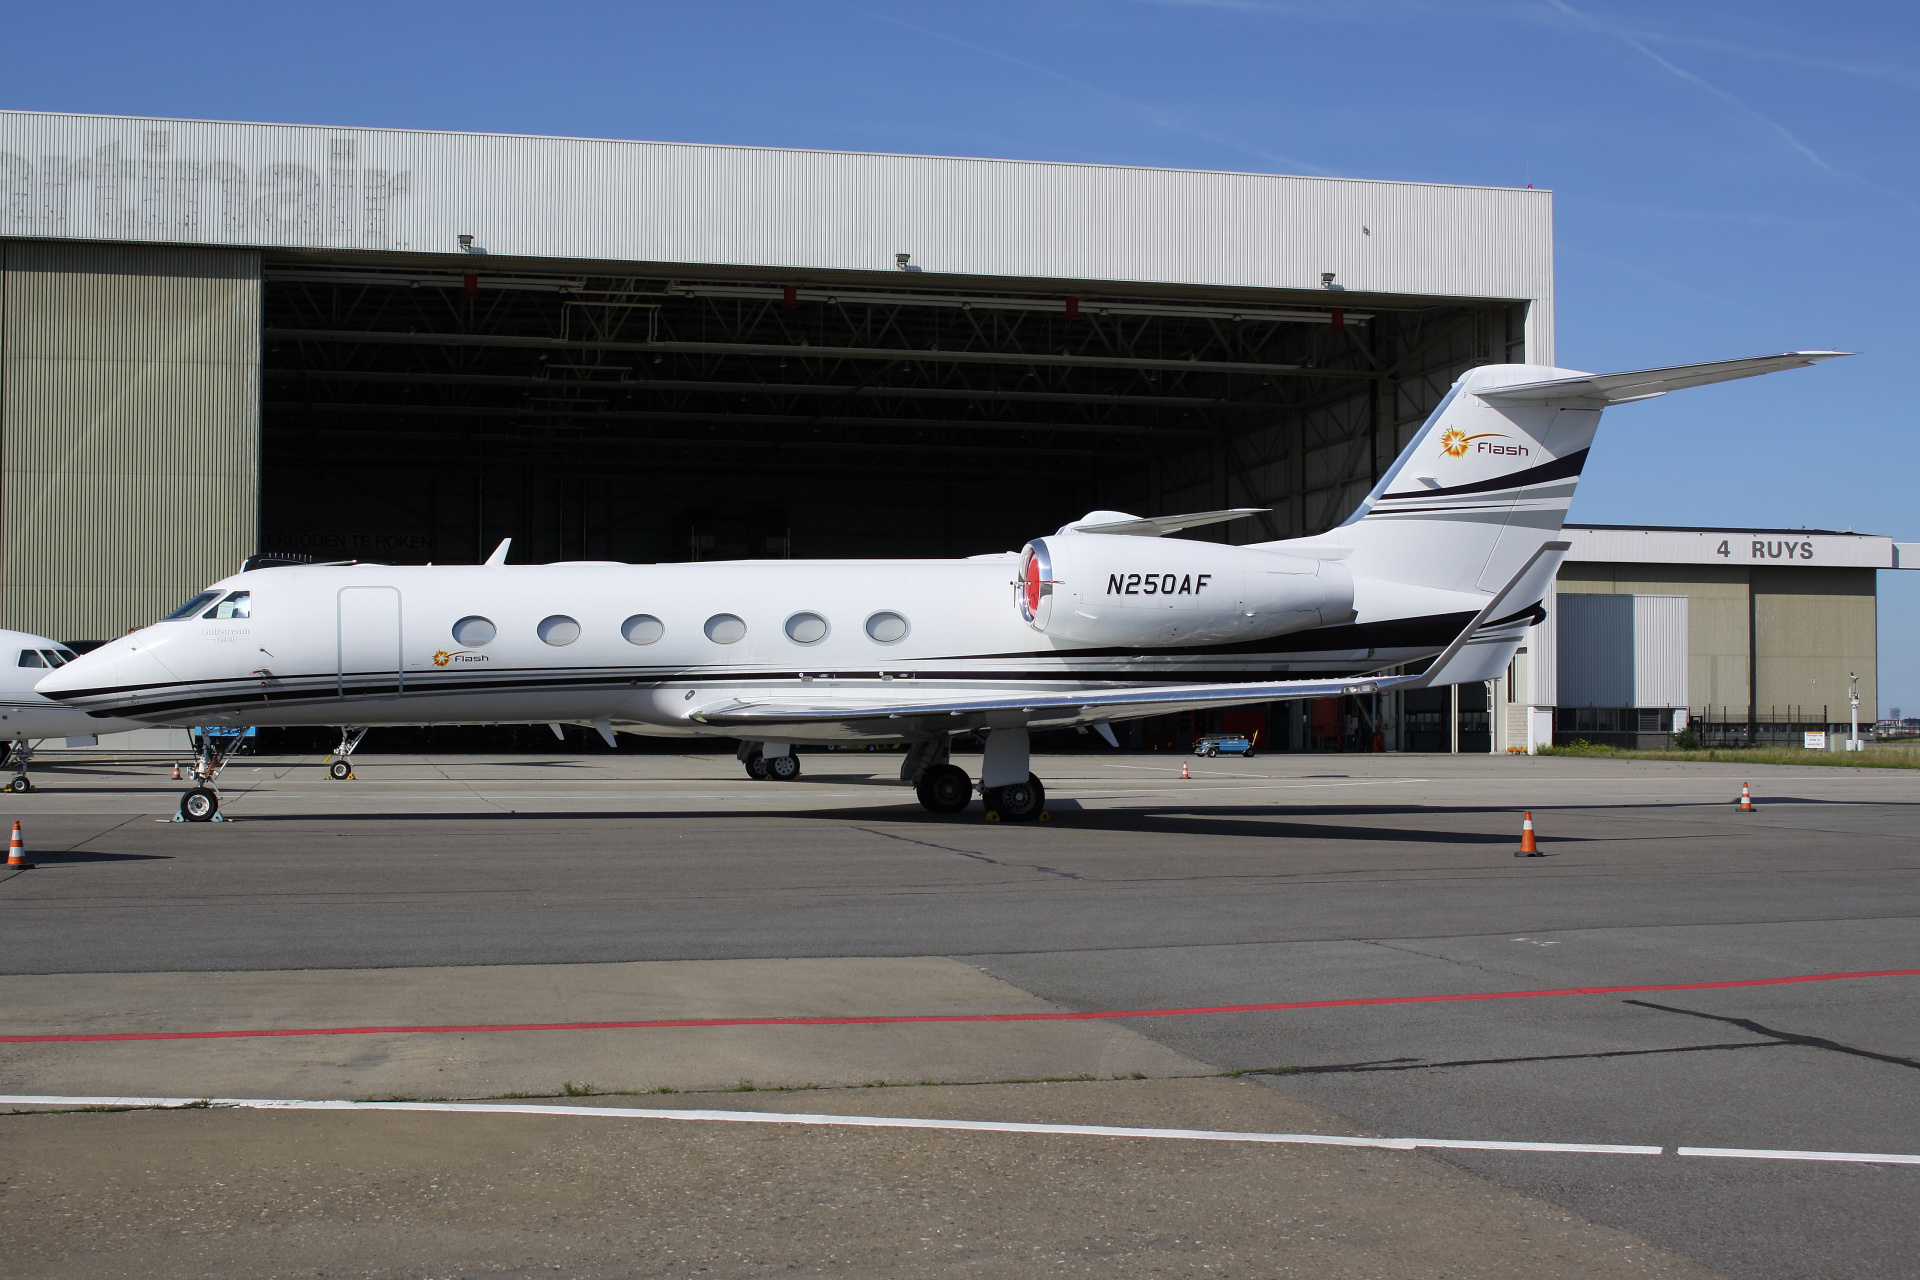 G450, N250AF, private (Aircraft » Schiphol Spotting » Gulfstream IV and revisions)